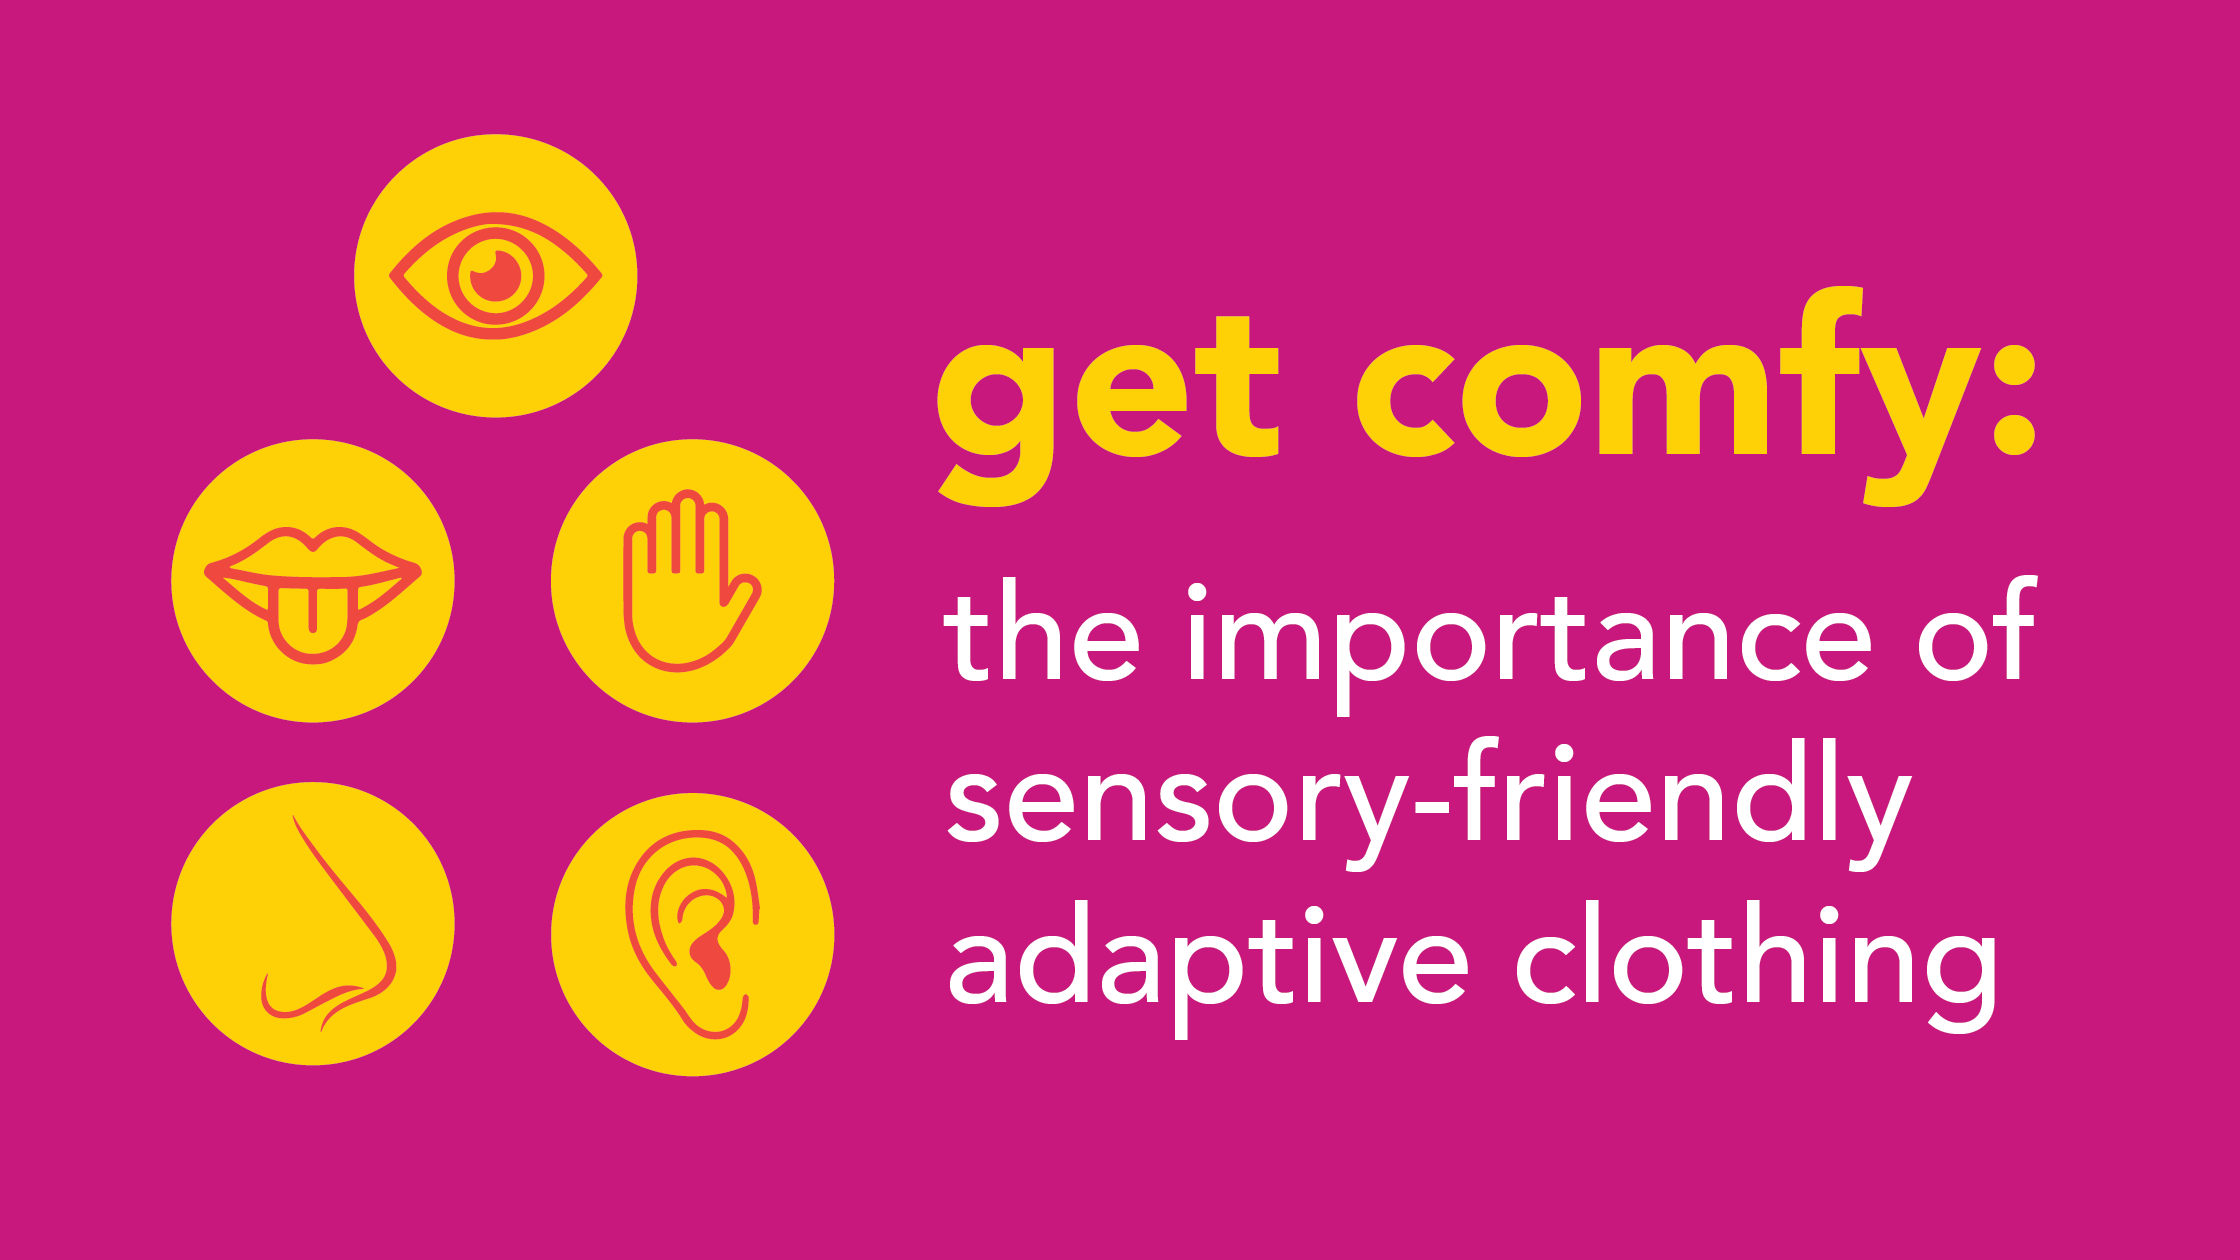 Get Comfy: The Importance of Sensory-Friendly Adaptive Clothing